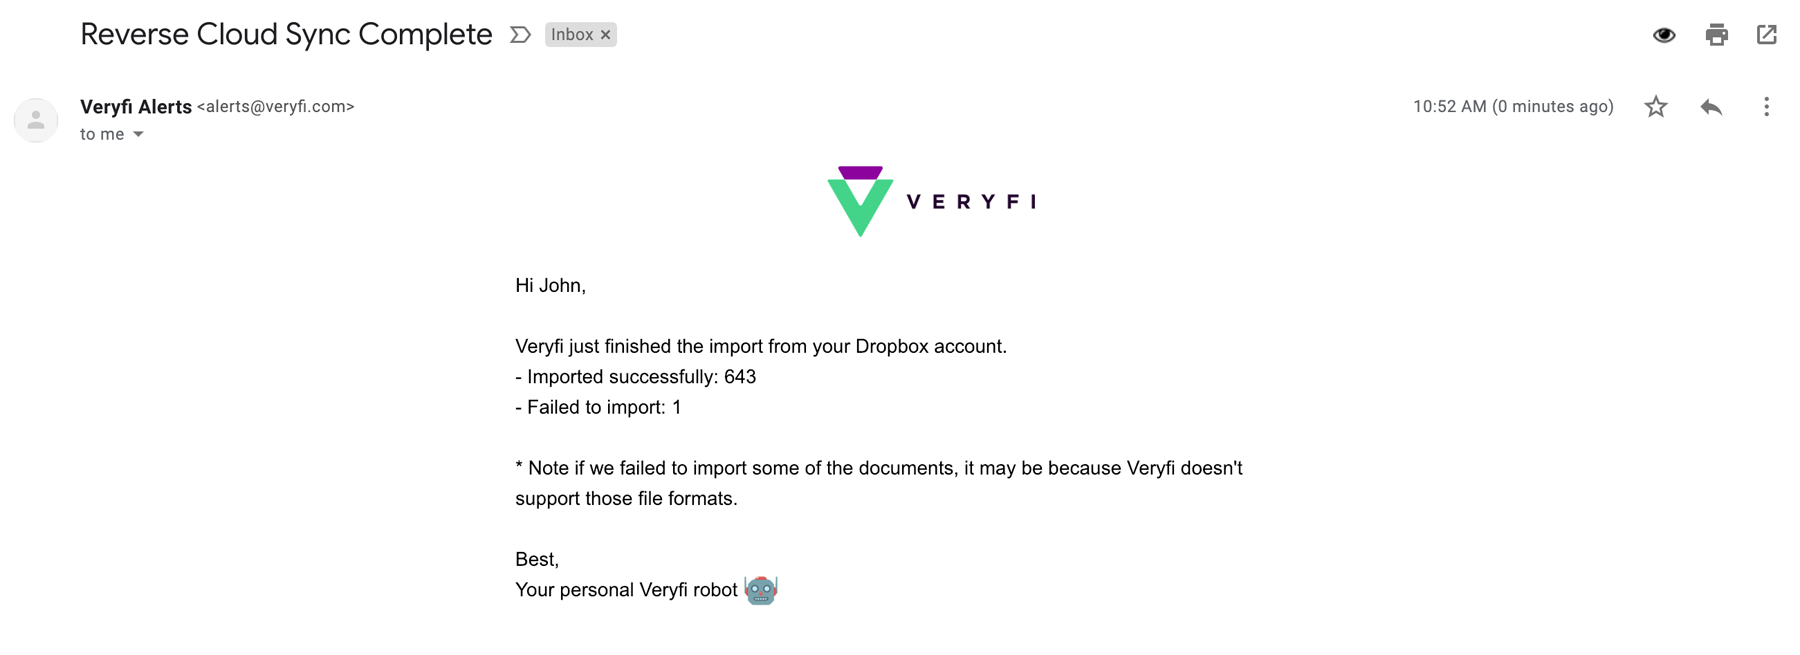 Veryfi Alert sent to your inbox to inform you of a completed processing